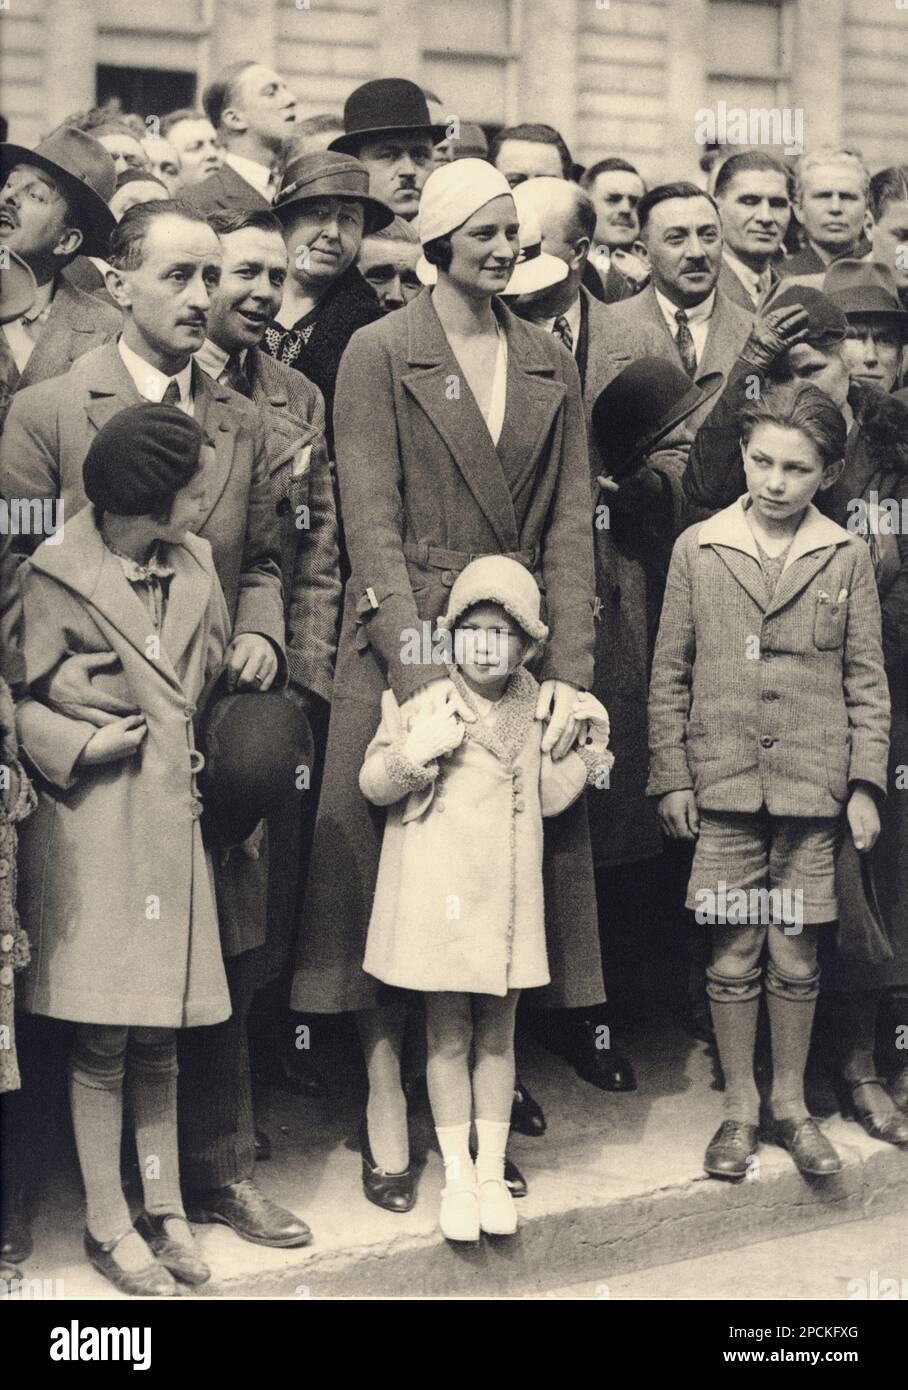 1932 , april , BRUXELLES , Belgium : The Queen ASTRID of BELGIUM ( born princesse of Sweden , 1905 - 1935 ), married to King LEOPOLD III of Belgians   SAXE COBURG GOTHA ( 1901 - 1983 ), with the daughter JOSEPHINE-CHARLOTTE ( 11 october 1927 - 10 january 2005 ) future Grand Duchesse of LUXEMBURG , married in 1953 with Prince Jean of Nassau Prince of Bourbon-Parma Grand Duke of Luxemburg . In this photo during a military parade wanted to see the prince Leopold  with the military calvary troups into the crowds of normal people and children . Photo by G. Van Parys , Bruxelles  - House of BRABANT Stock Photo